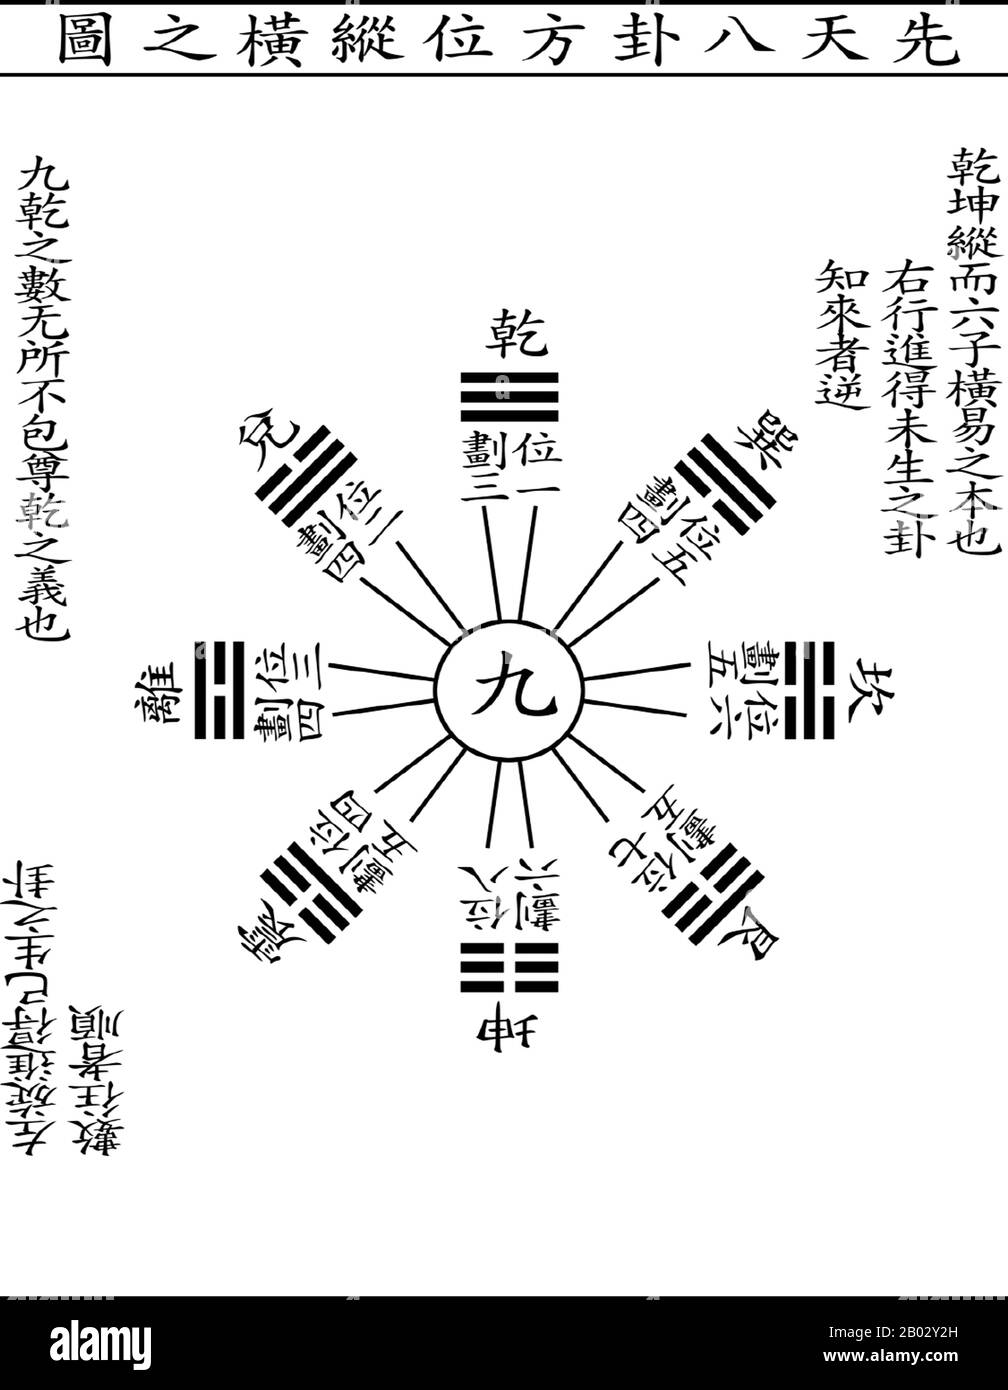 The bagua are eight trigrams used in Taoist cosmology to represent the fundamental principles of reality, seen as a range of eight interrelated concepts.  Each consists of three lines, each line either 'broken' or 'unbroken'', representing yin or yang, respectively. Due to their tripartite structure, they are often referred to as 'trigrams' in English. Stock Photo